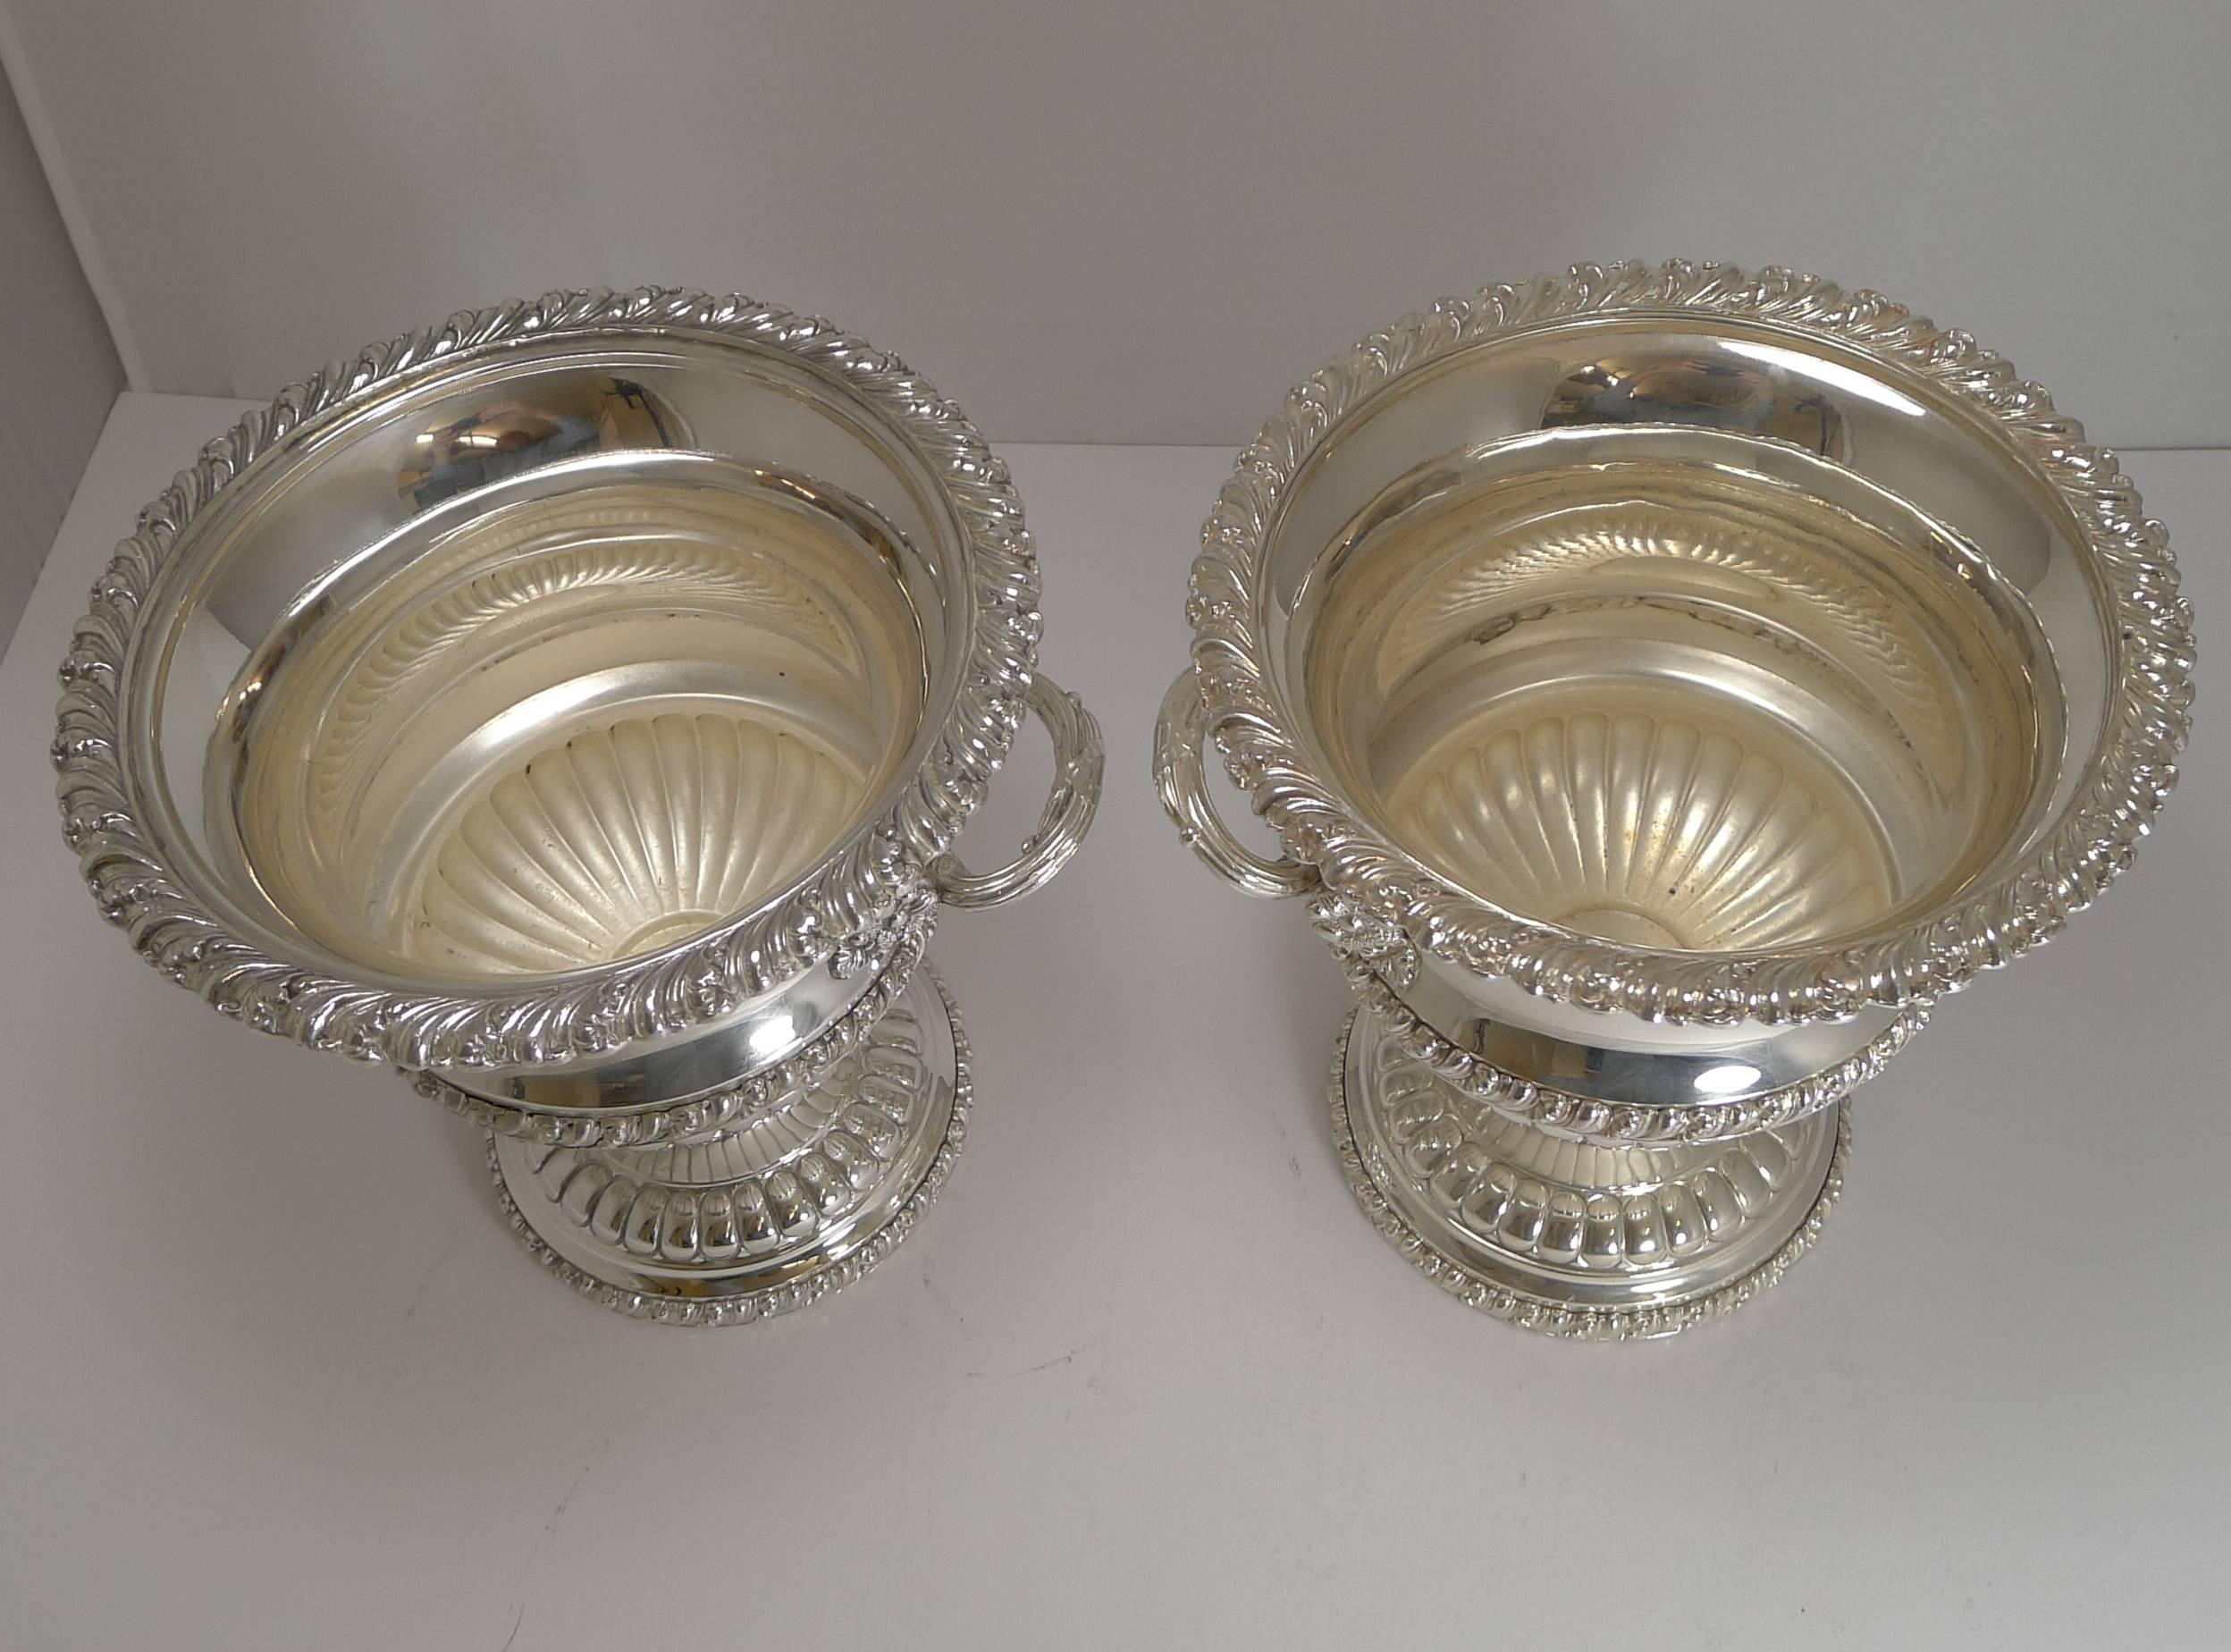 A magnificent and elegant pair of late Victorian / early Edwardian wine or champagne coolers made from silver on copper dating to circa 1900.

Beautiful decorative handles with a good weight ready for the finest event. Excellent condition each